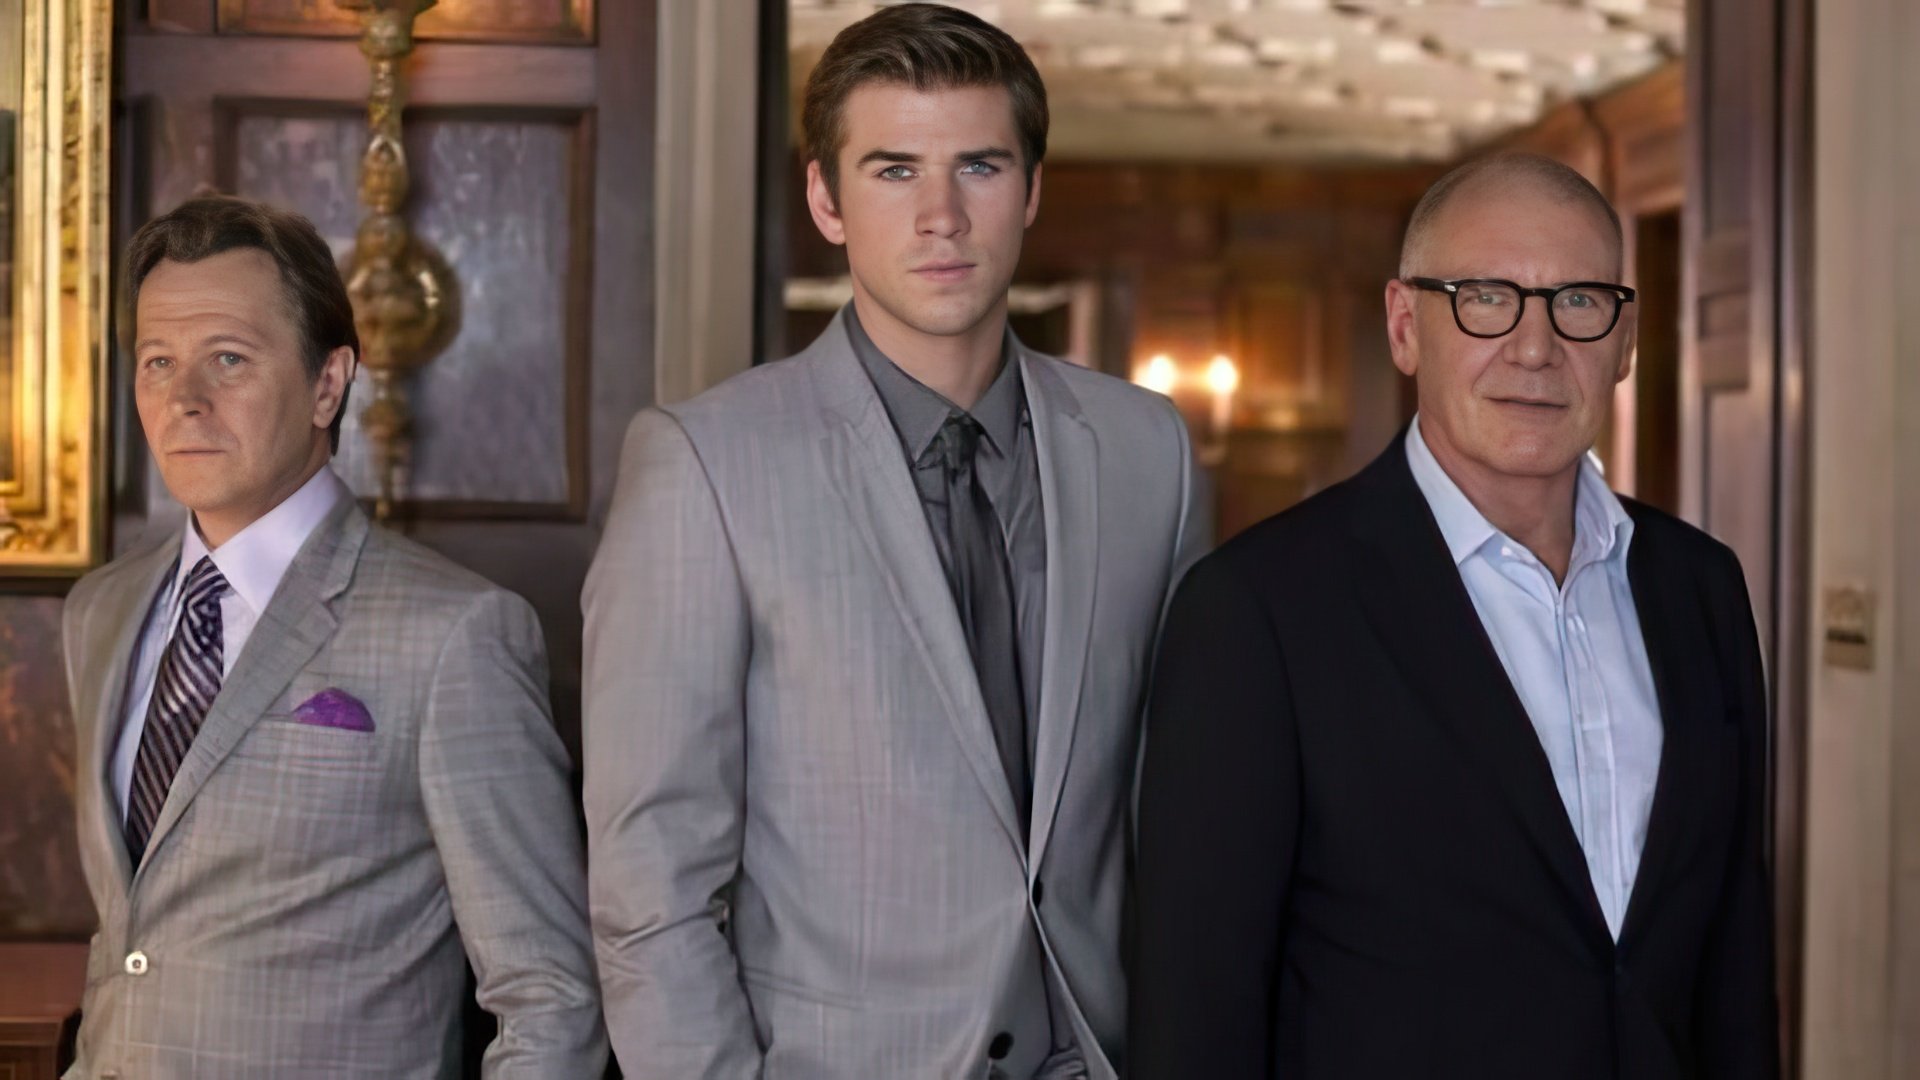 Liam Hemsworth with Gary Oldman and Harrison Ford